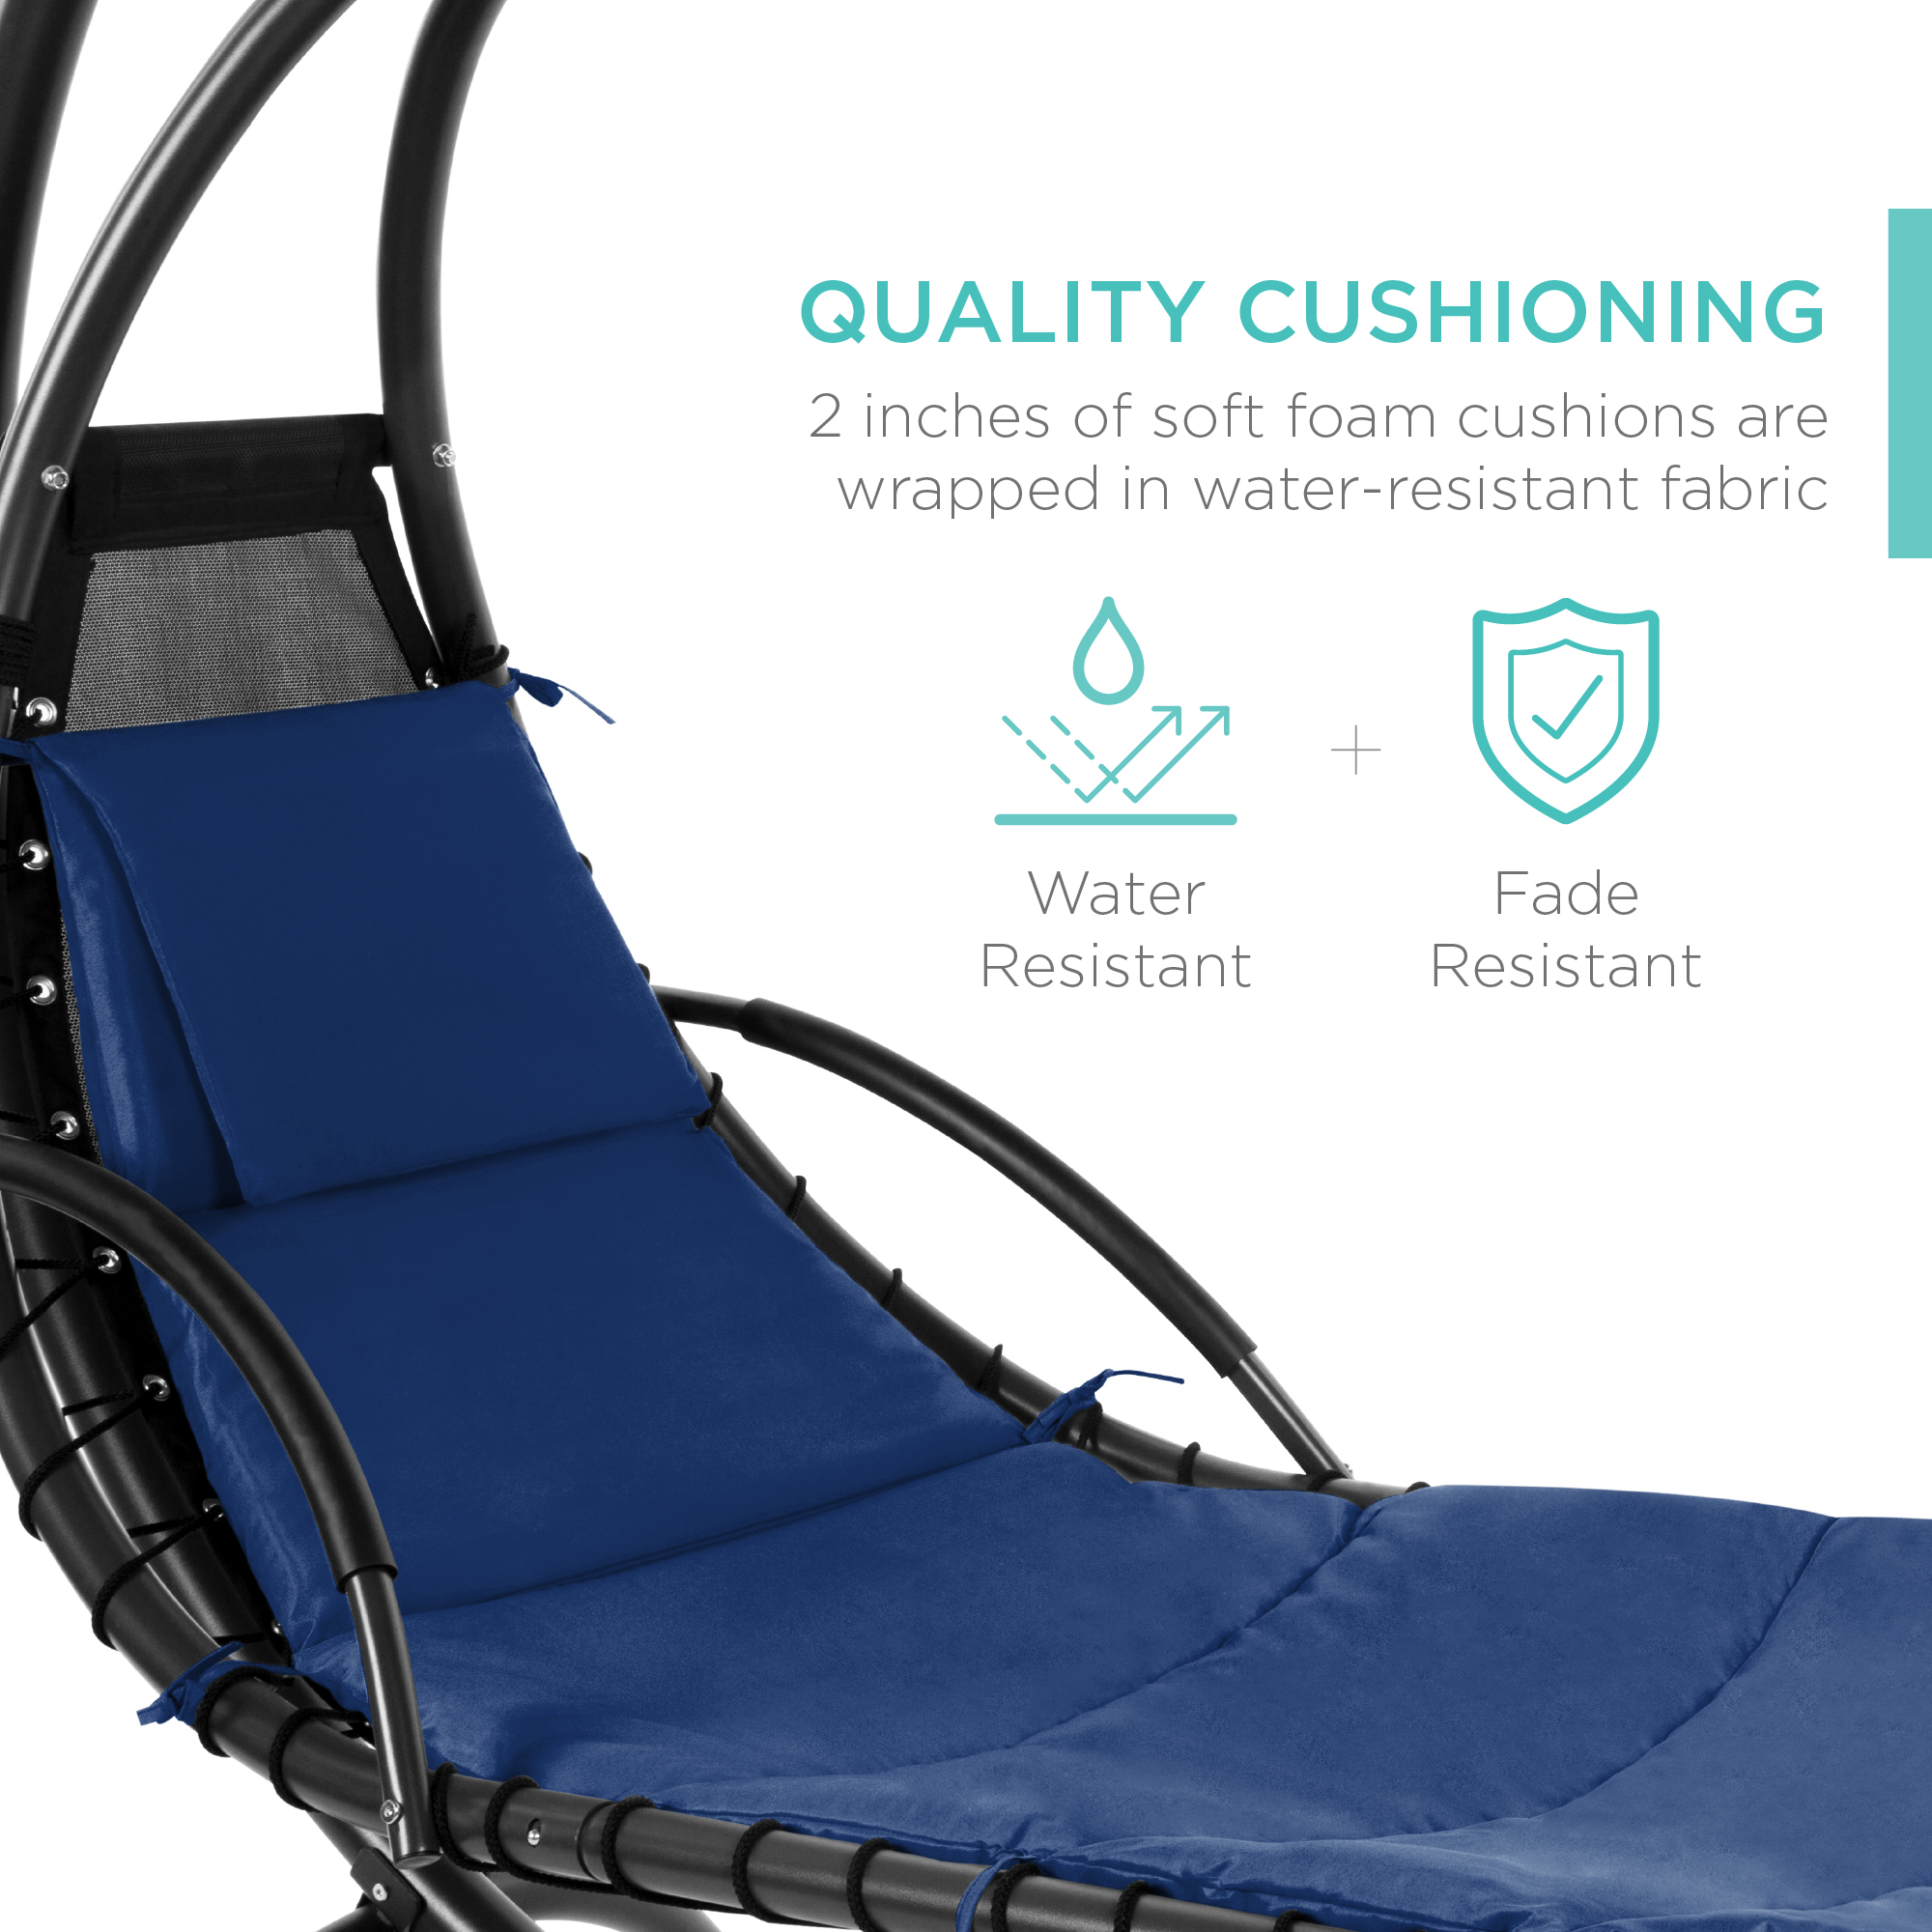 Best Choice Products Hanging Curved Chaise Lounge Chair Swing for Backyard, Patio w/ Pillow, Shade, Stand - Navy Blue - image 5 of 8